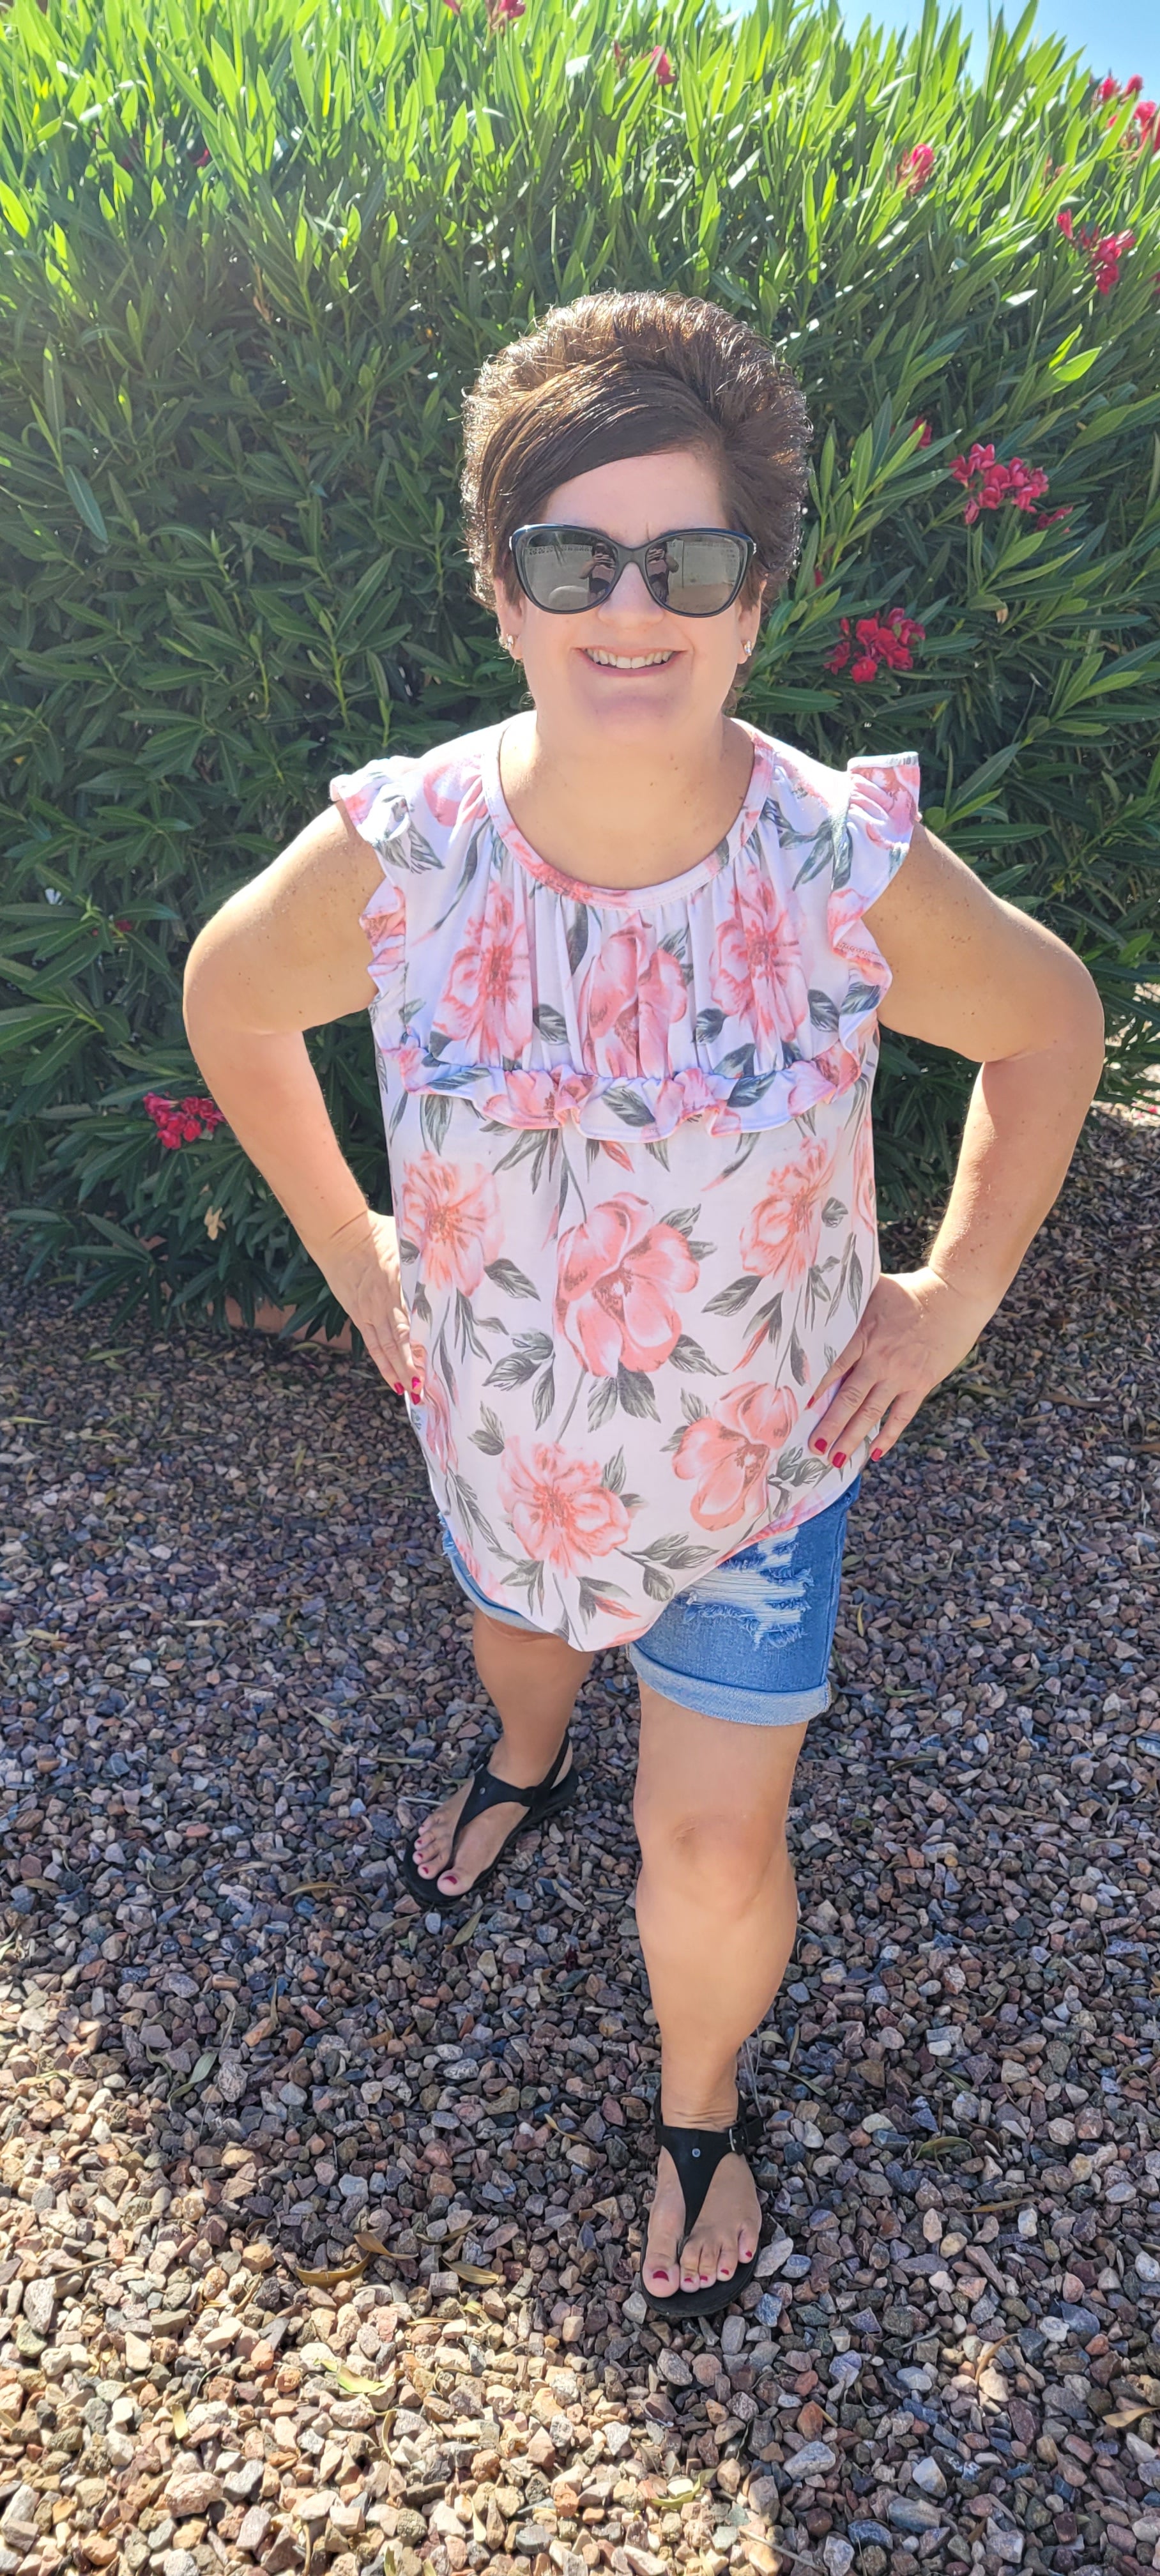 “Garden Goddess” is a comfy and casual top! This sleeveless white shirt features a beautiful pink and sage floral print. It is a baby doll top with rounded neckline, ruffled details on sleeves and chest. This top is so soft and comfy! There is a terry cloth texture inside. Sizes small through large.